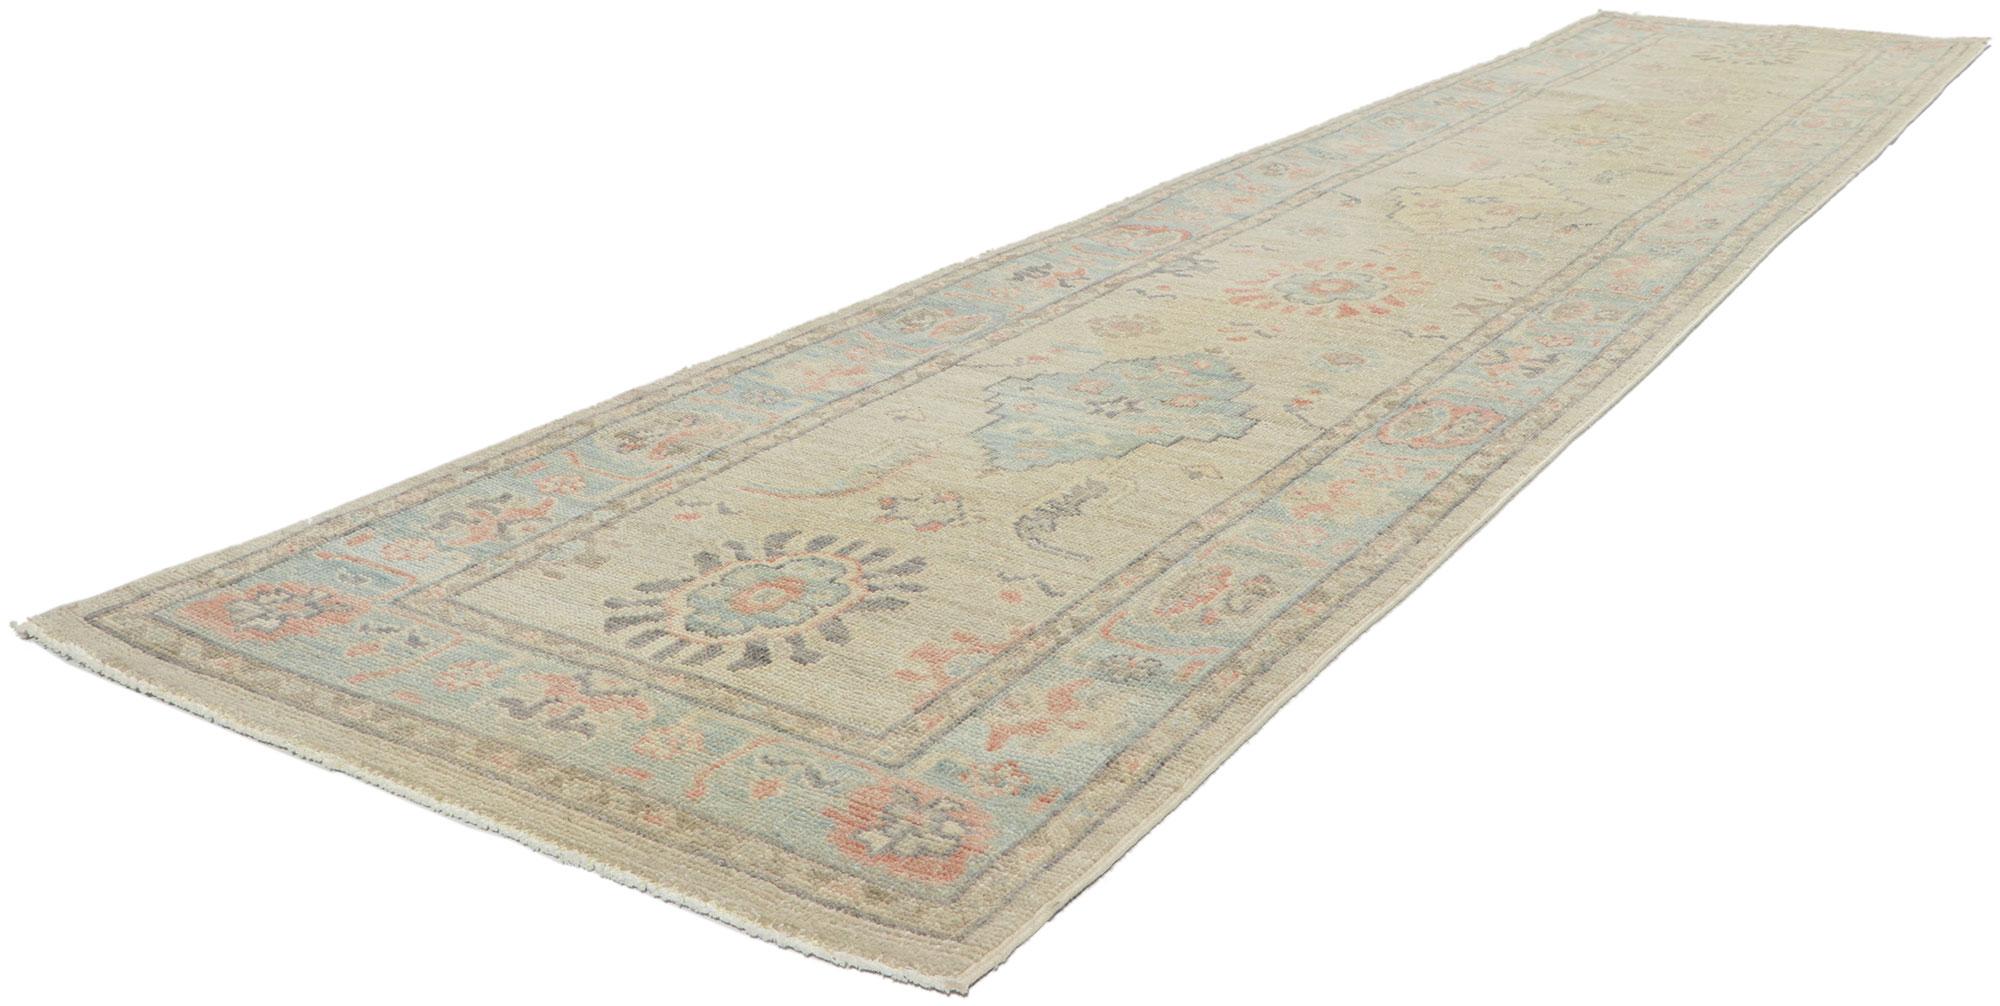 80840 Contemporary Oushak runner, 02'07 x 11'07. Polished and playful, this hand-knotted wool contemporary Contemporary Oushak runner beautifully embodies a modern style. With elements of comfort, modern style and functional versatility, this Oushak